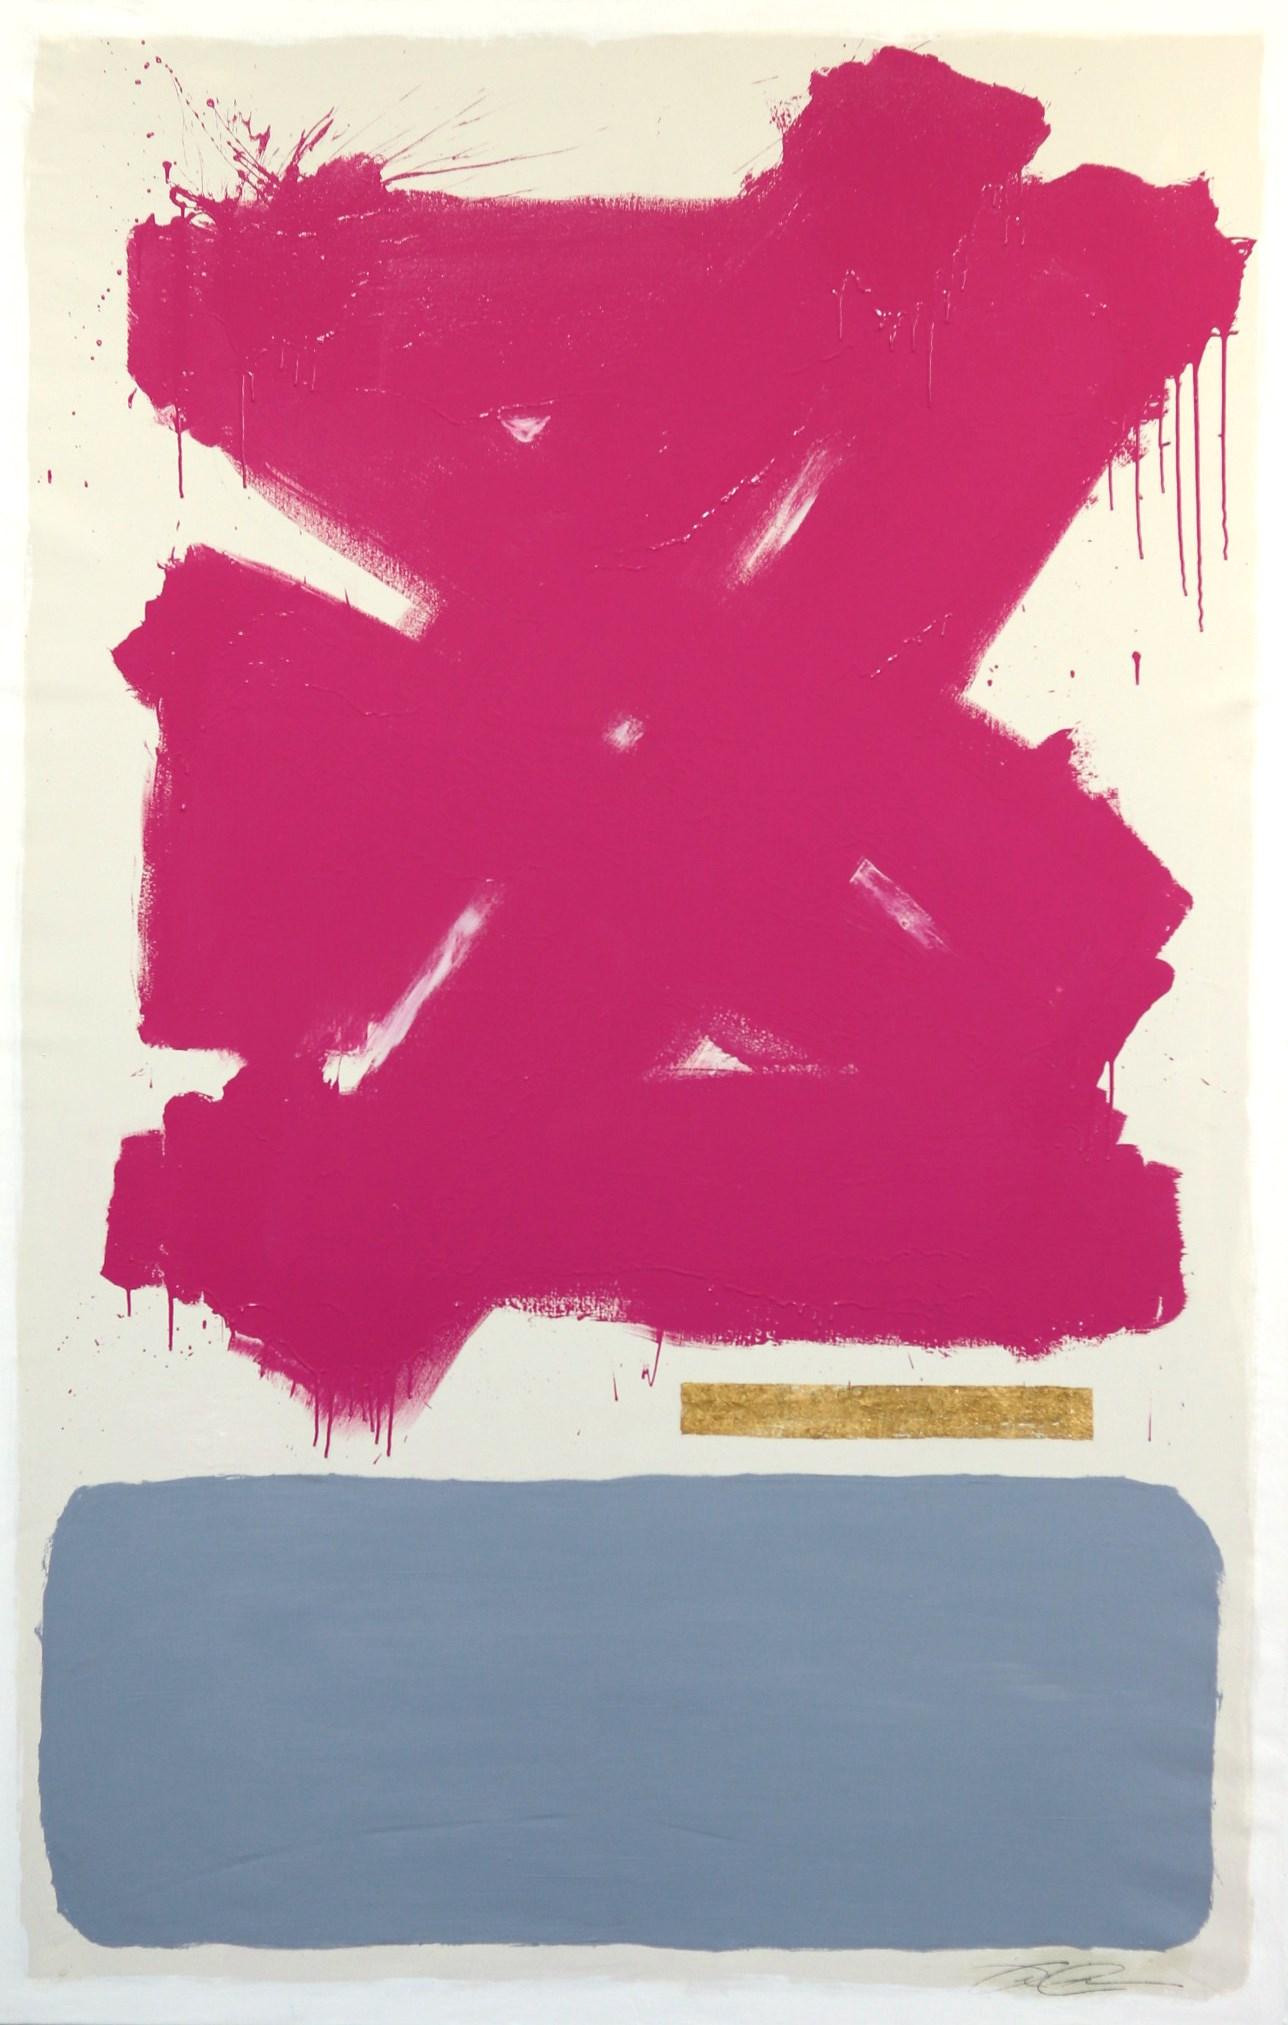 Jason DeMeo Abstract Painting - Truth, Beauty, Goodness: Pink - Large Meditative Gold Leaf Painting on Canvas